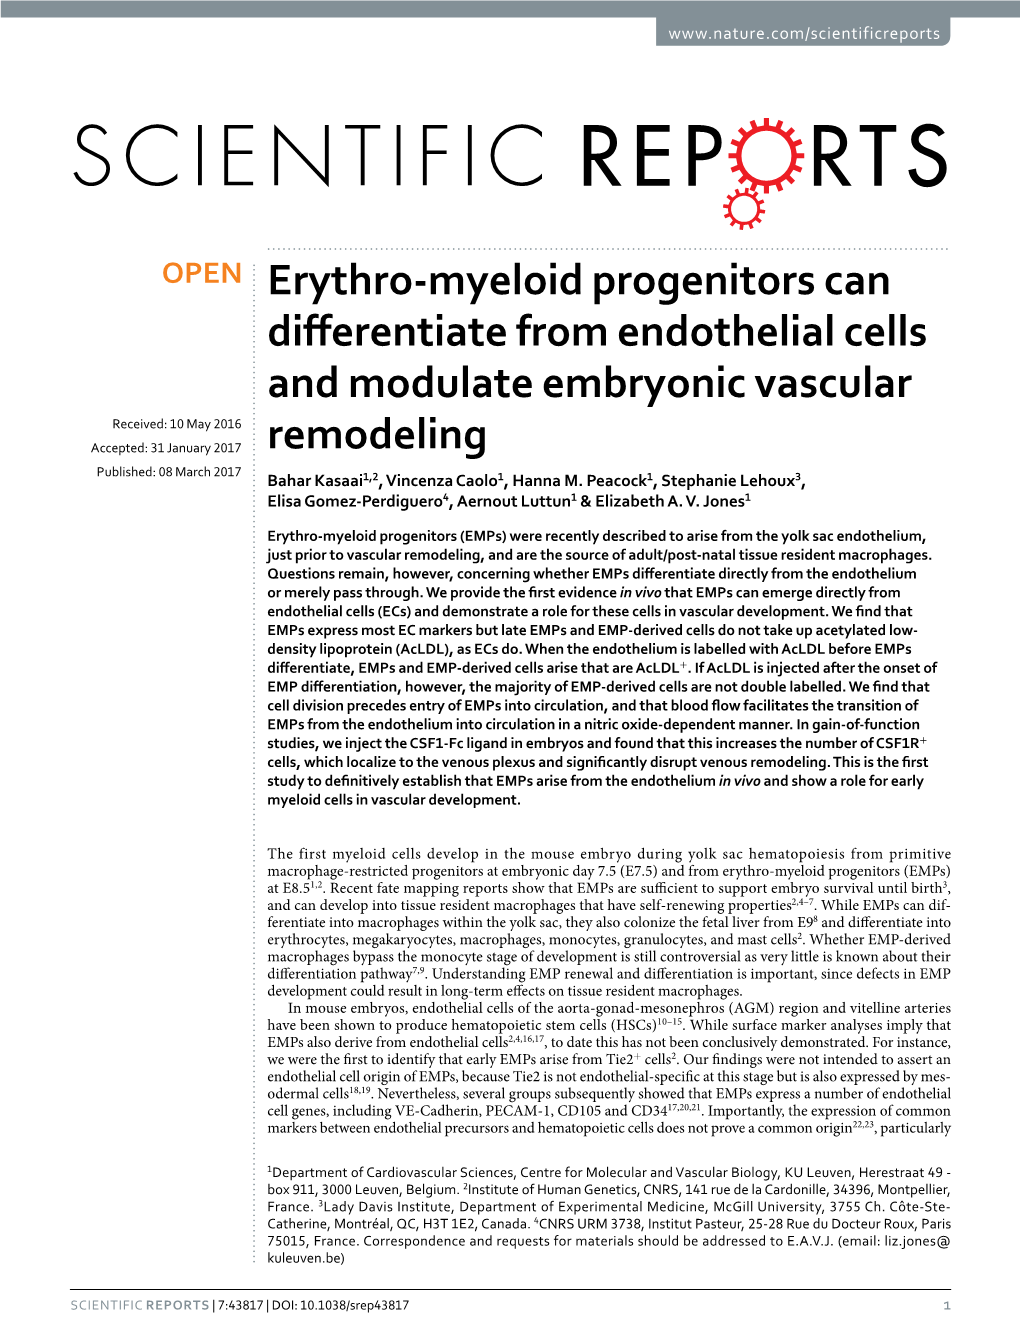 Erythro-Myeloid Progenitors Can Differentiate from Endothelial Cells